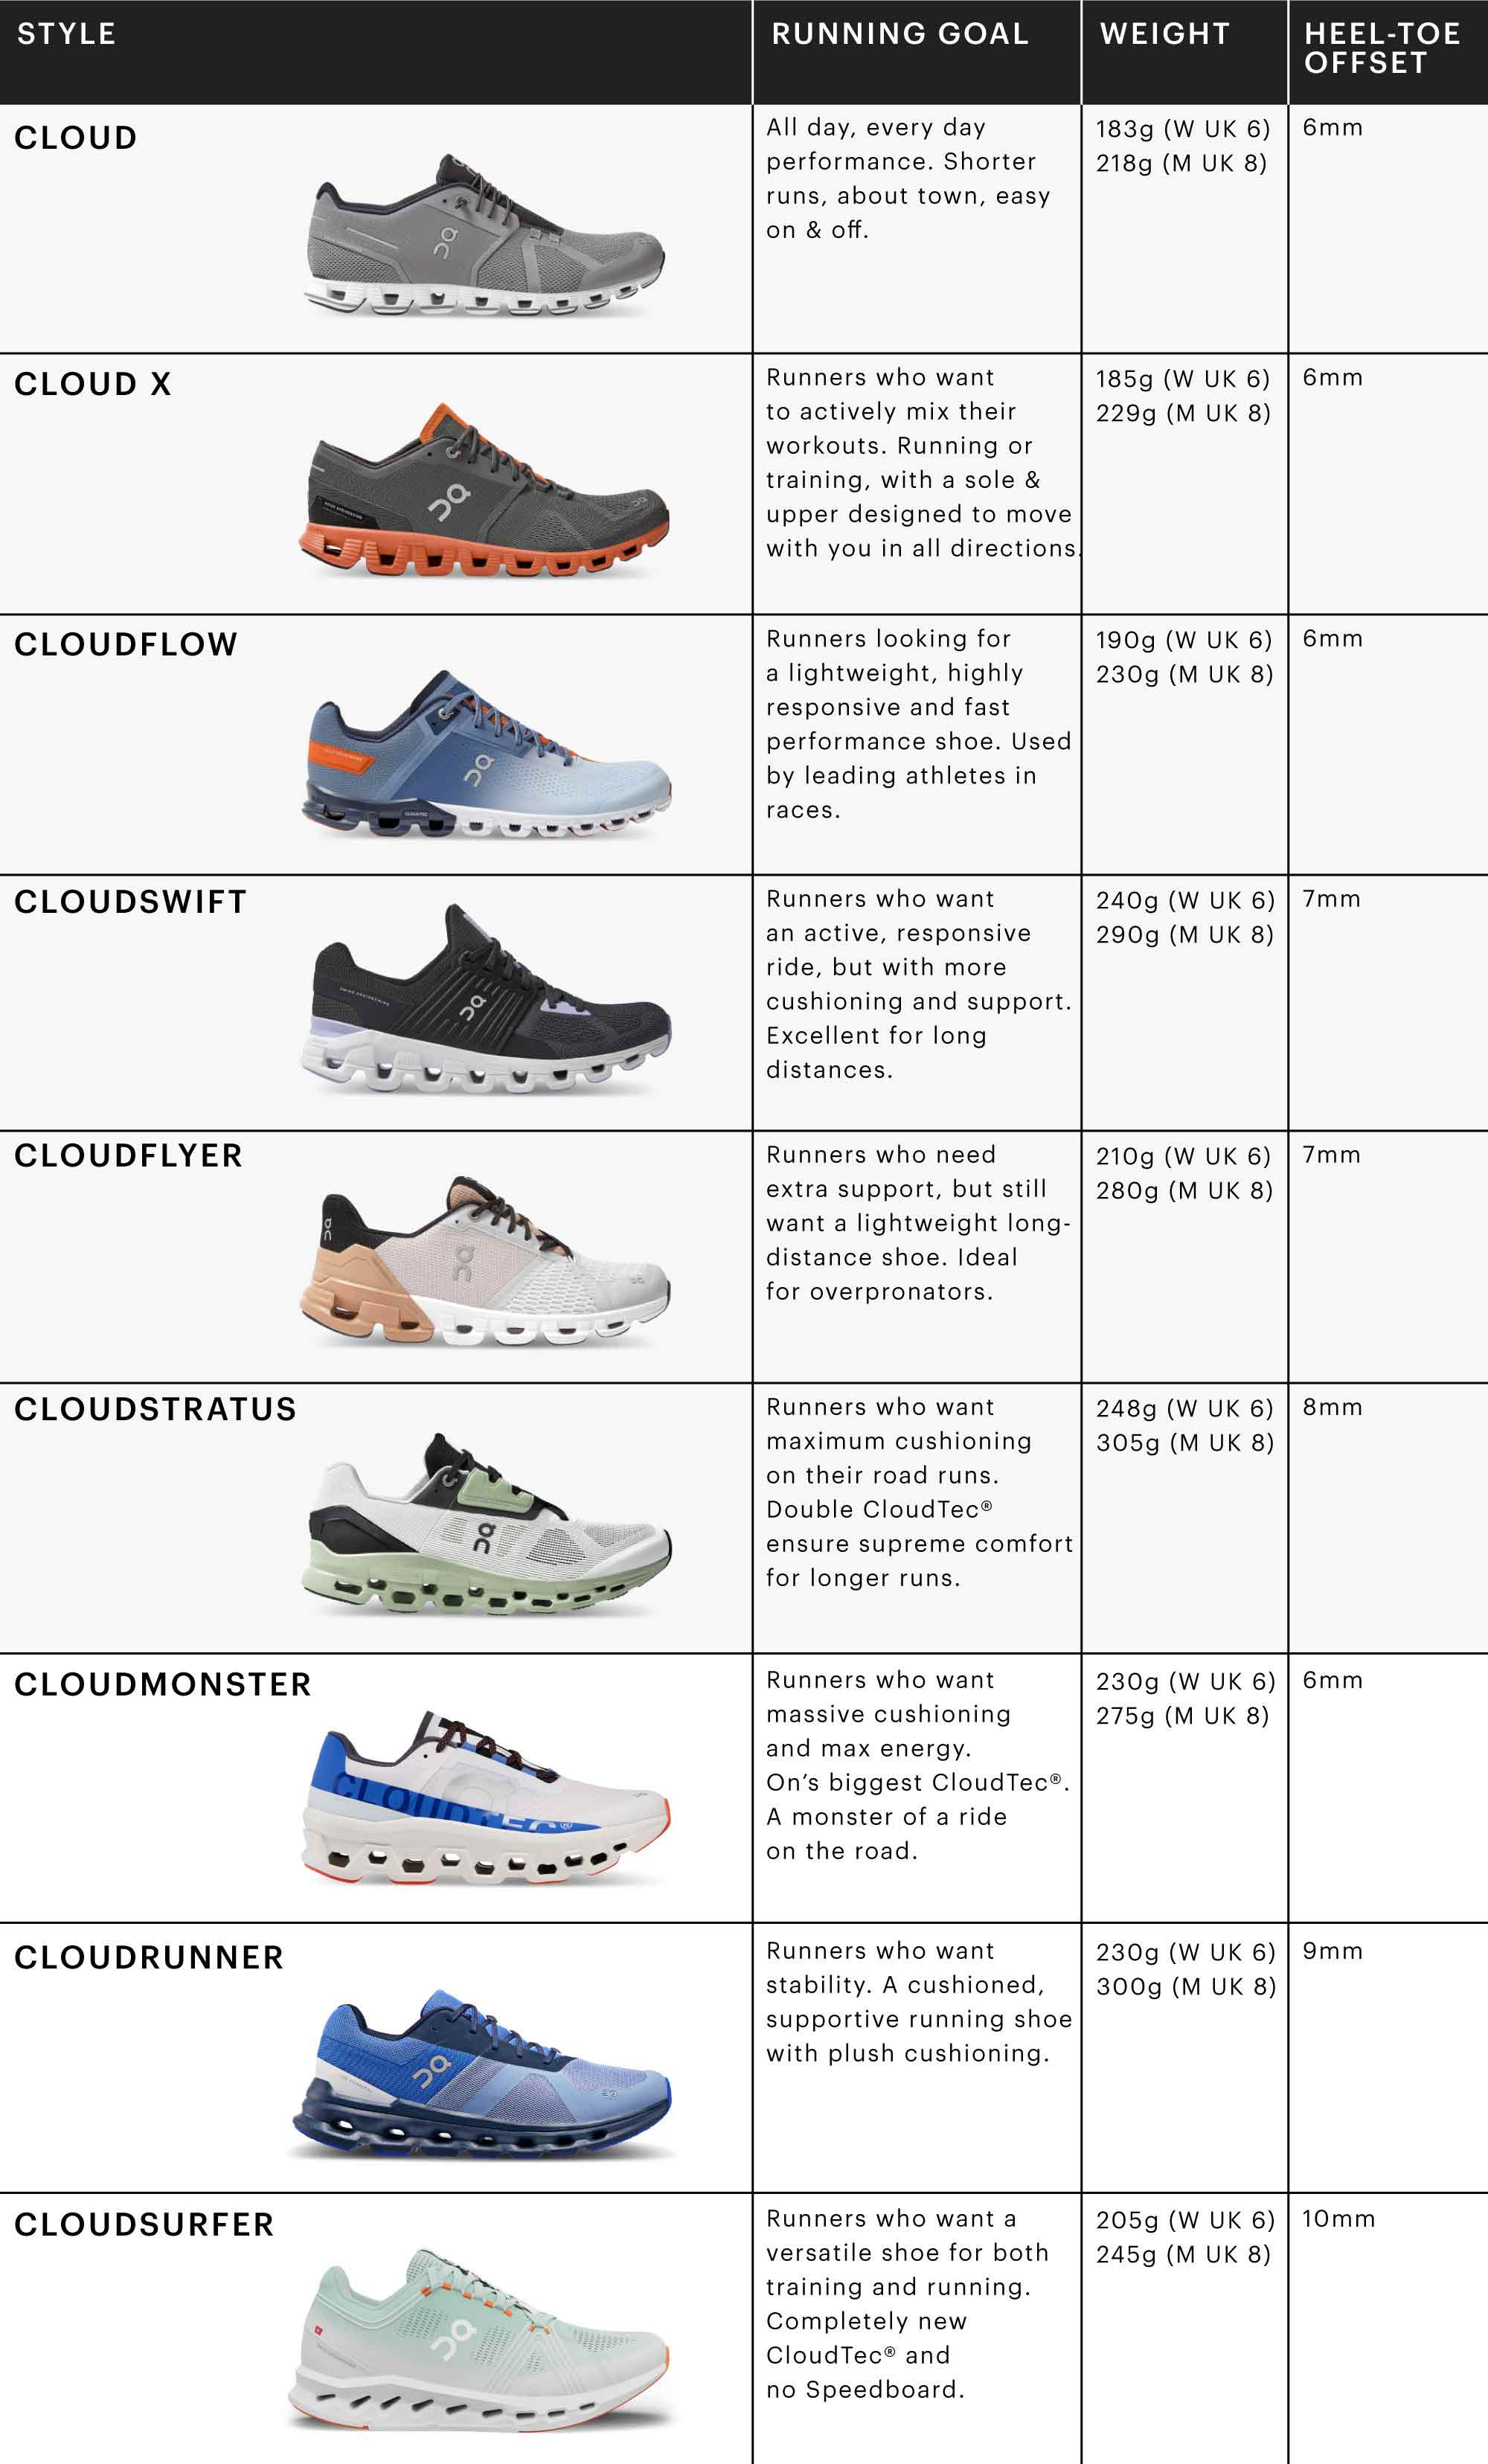 10 Best On Cloud Running Shoes: Ultimate Buyers Guide + Review